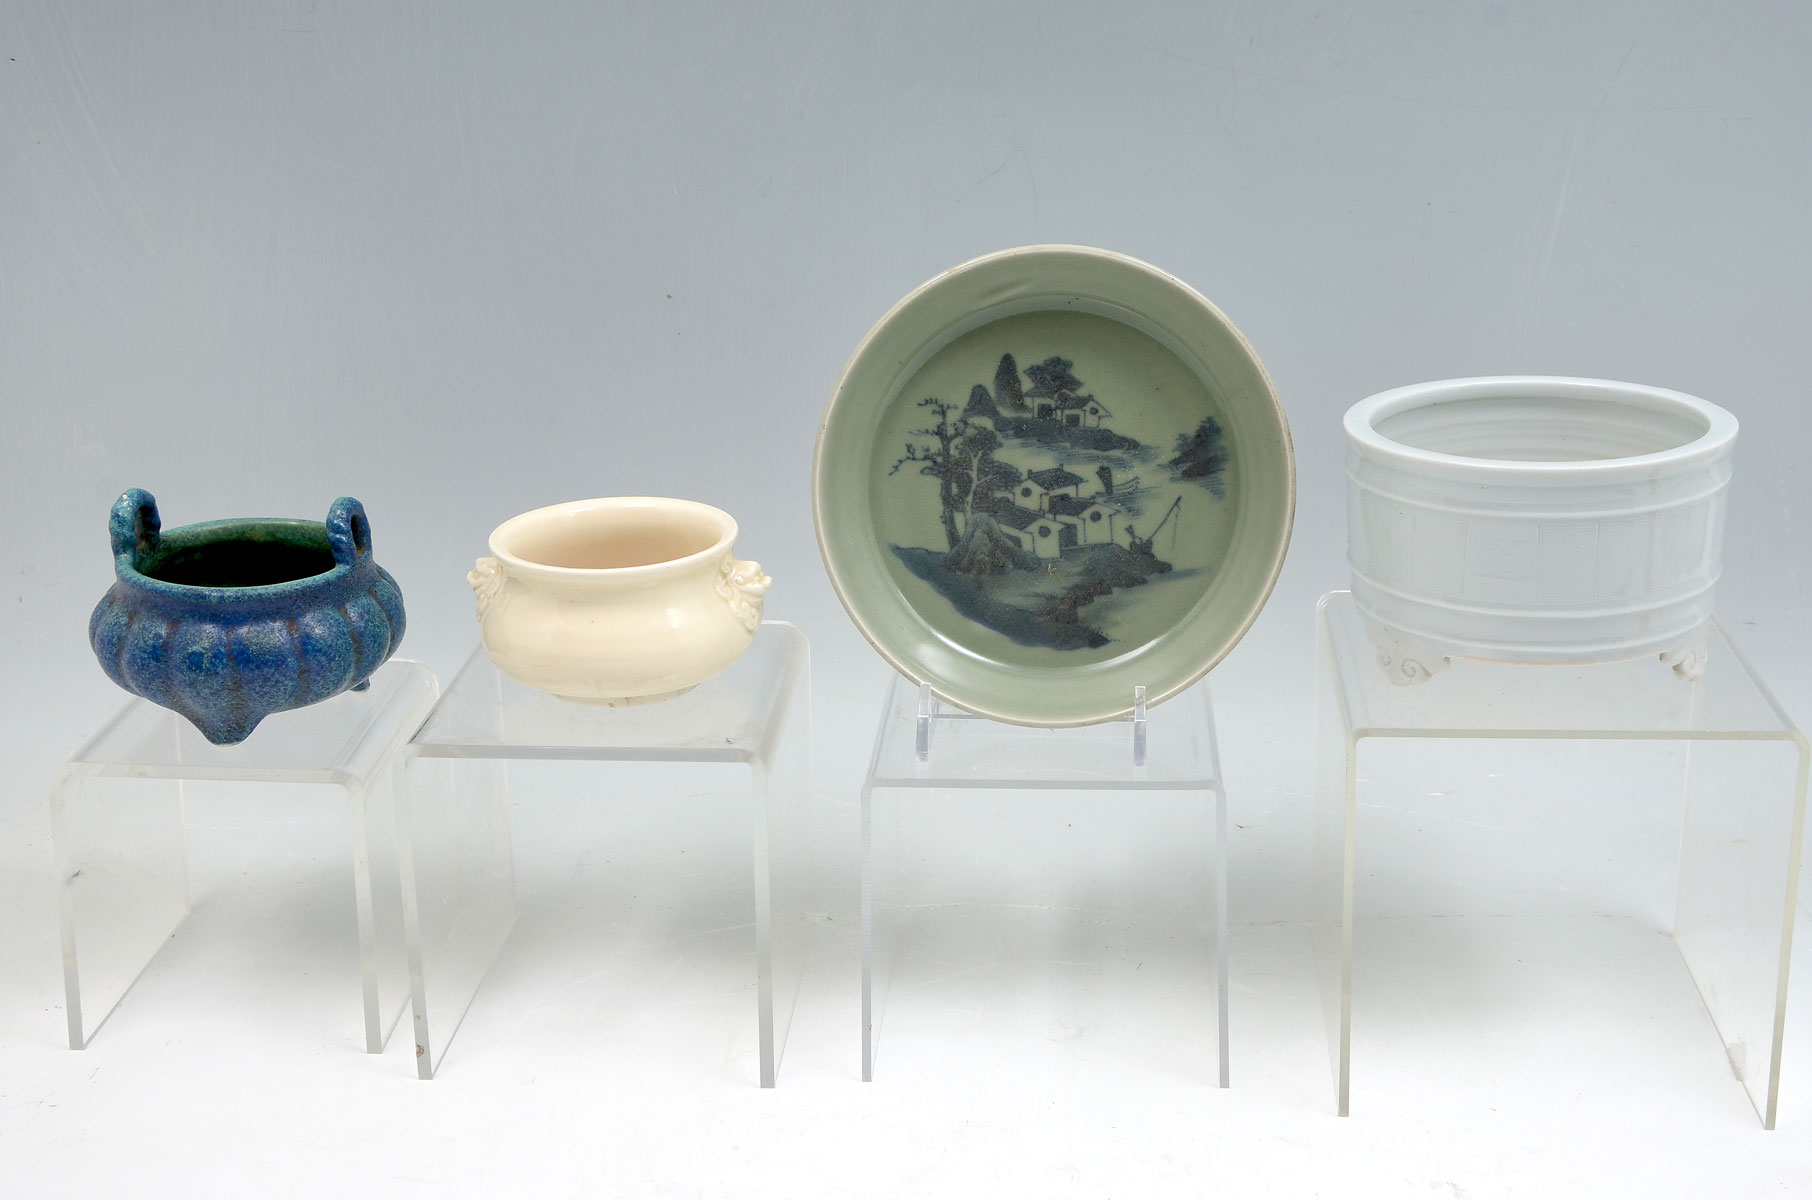 4 PIECE CHINESE PORCELAIN CENSOR